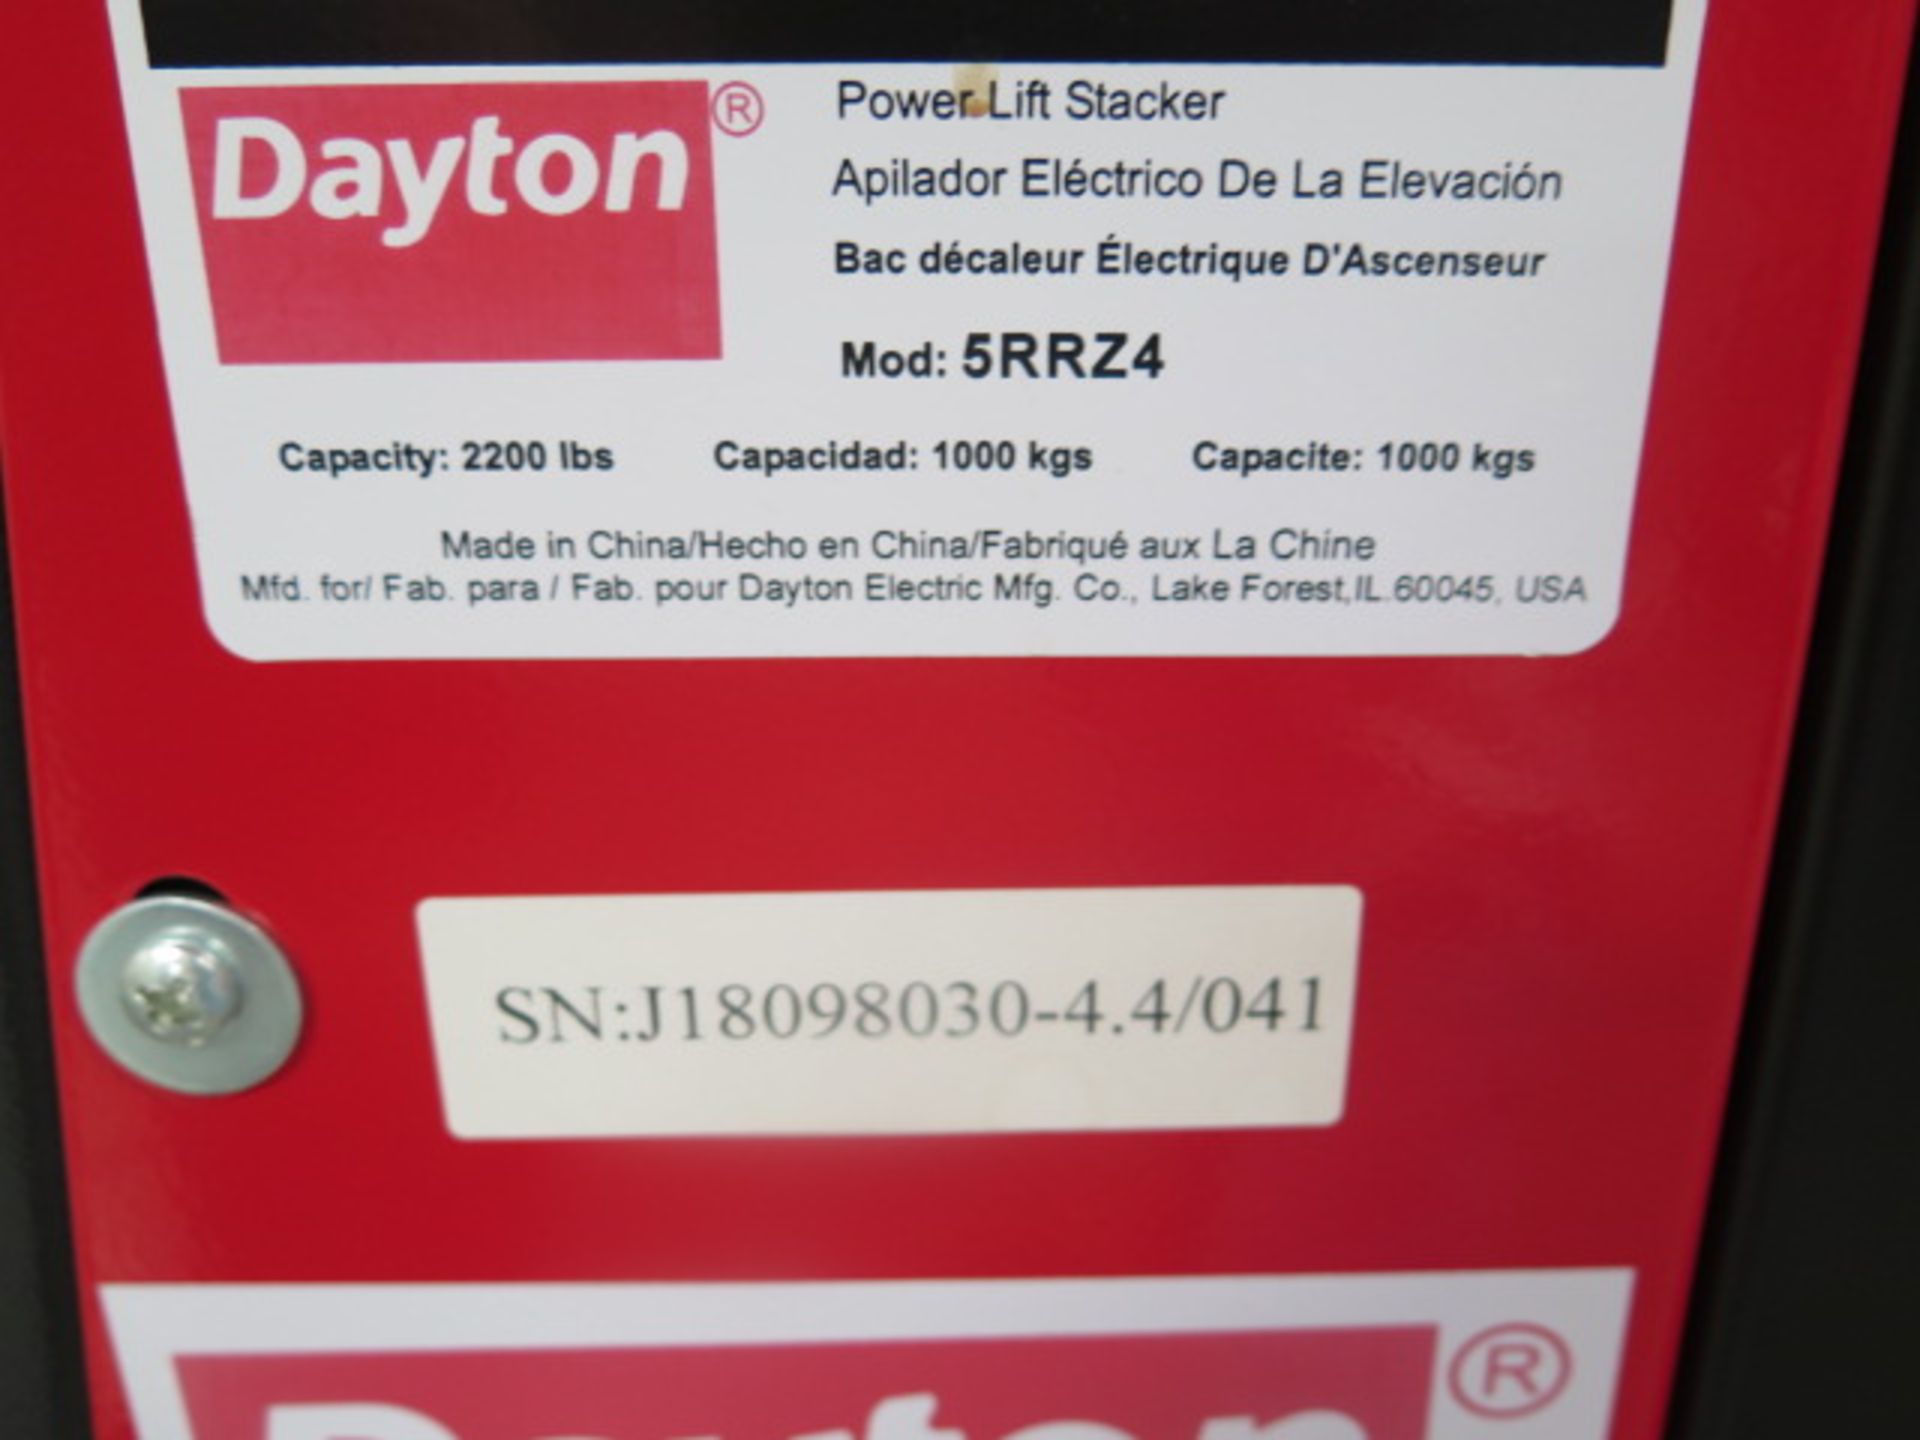 Dayton 5RRZ4 2200 Lb Cap Electric Pallet Mover s/n J18098030-4.4/041 w/ Charger SOLD AS-IS - Image 10 of 10